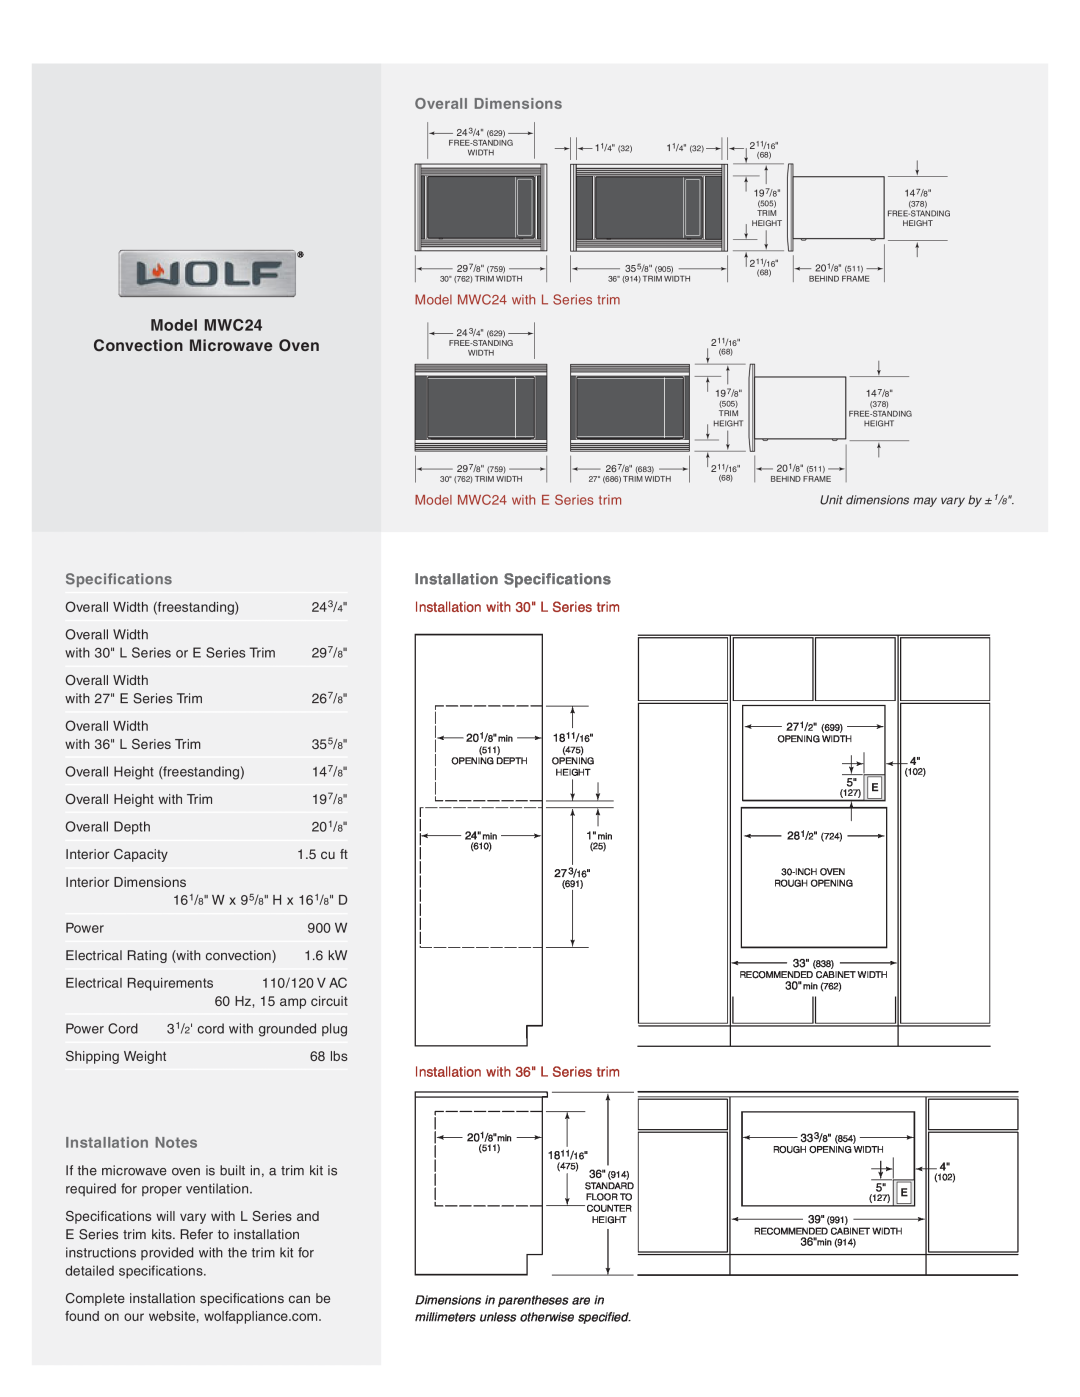 Wolf manual Model MWC24, Convection Microwave Oven, Overall Dimensions, Specifications, Installation Notes 